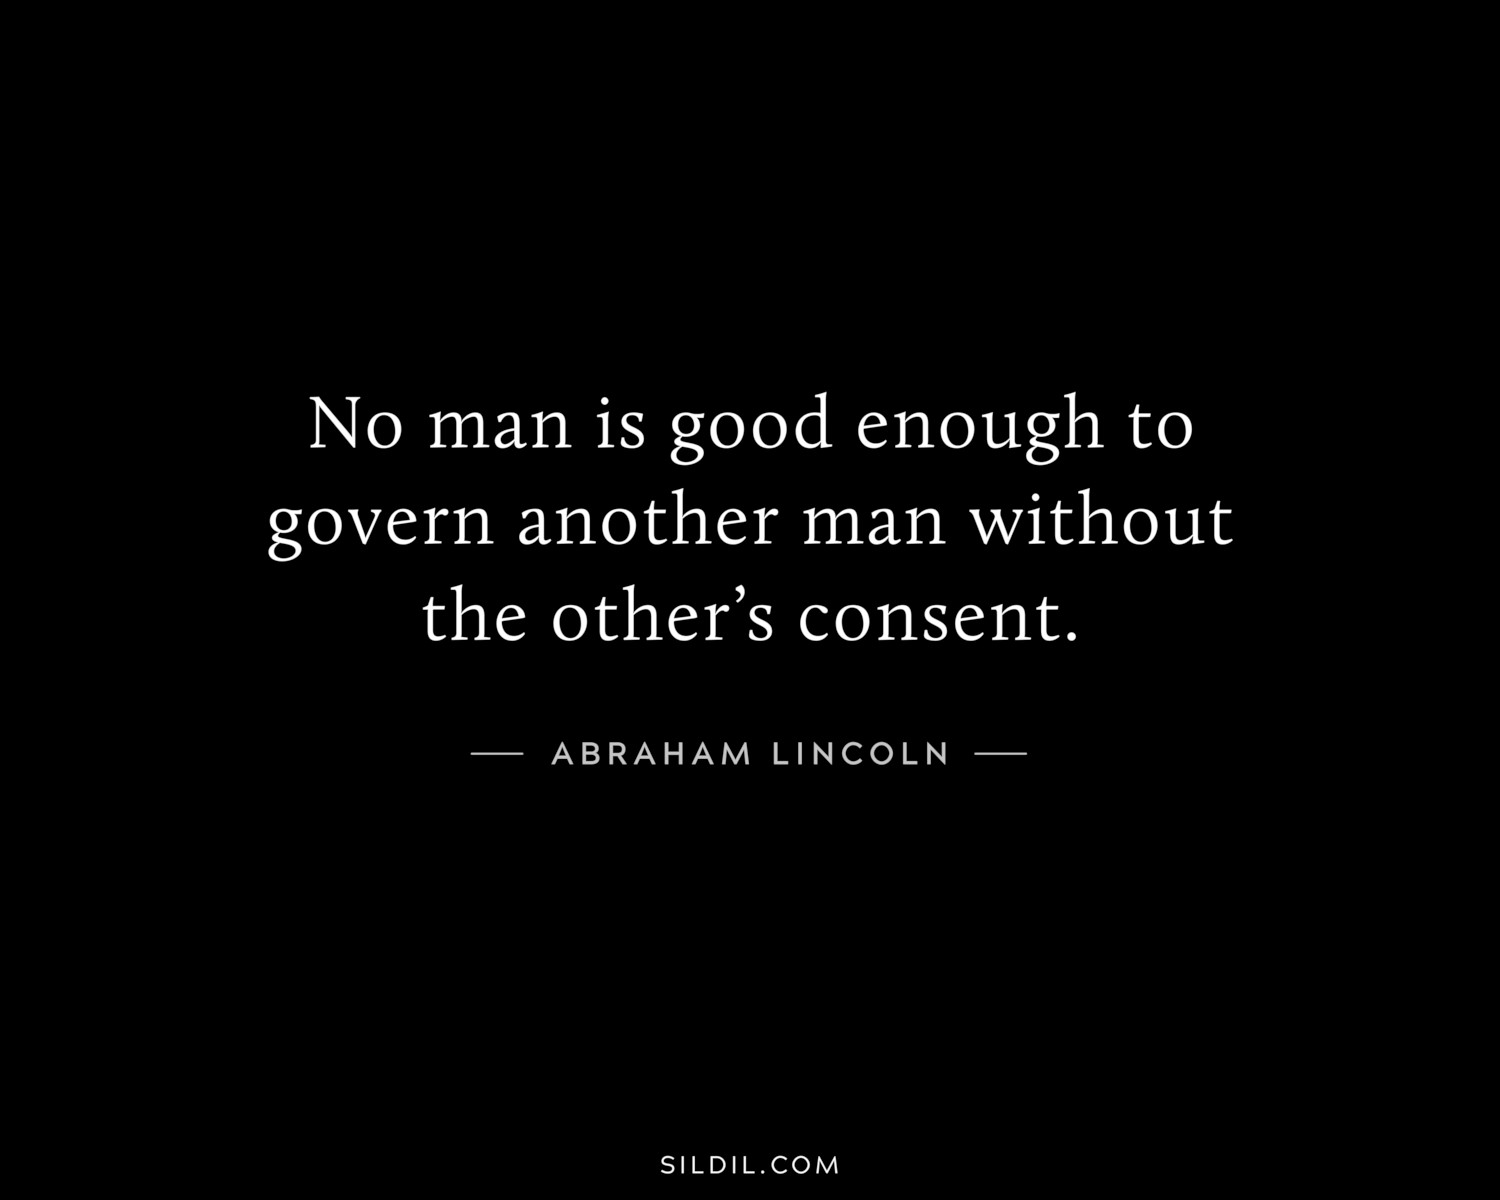 No man is good enough to govern another man without the other’s consent.